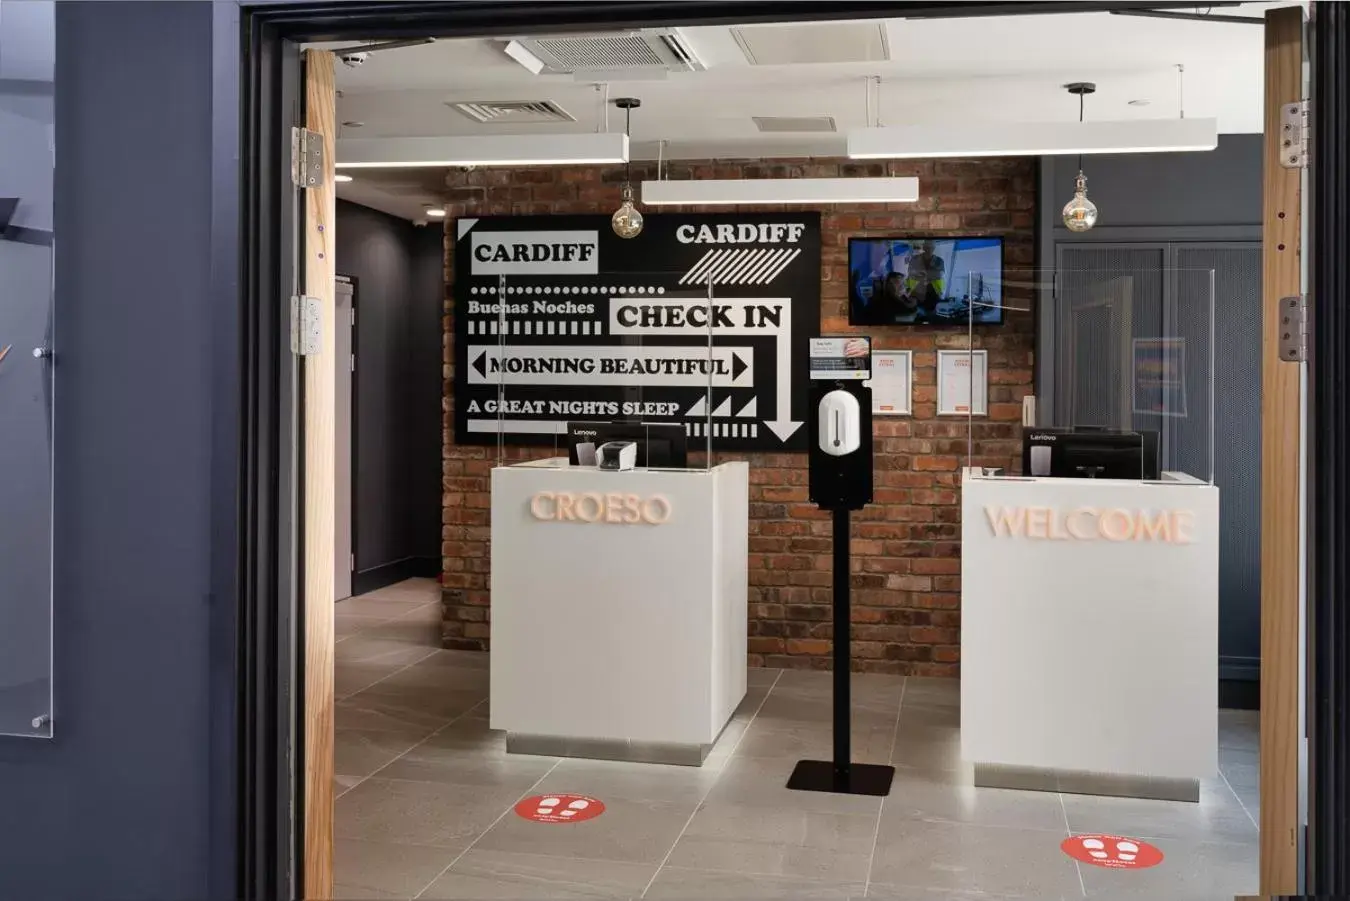 Property building in easyHotel Cardiff